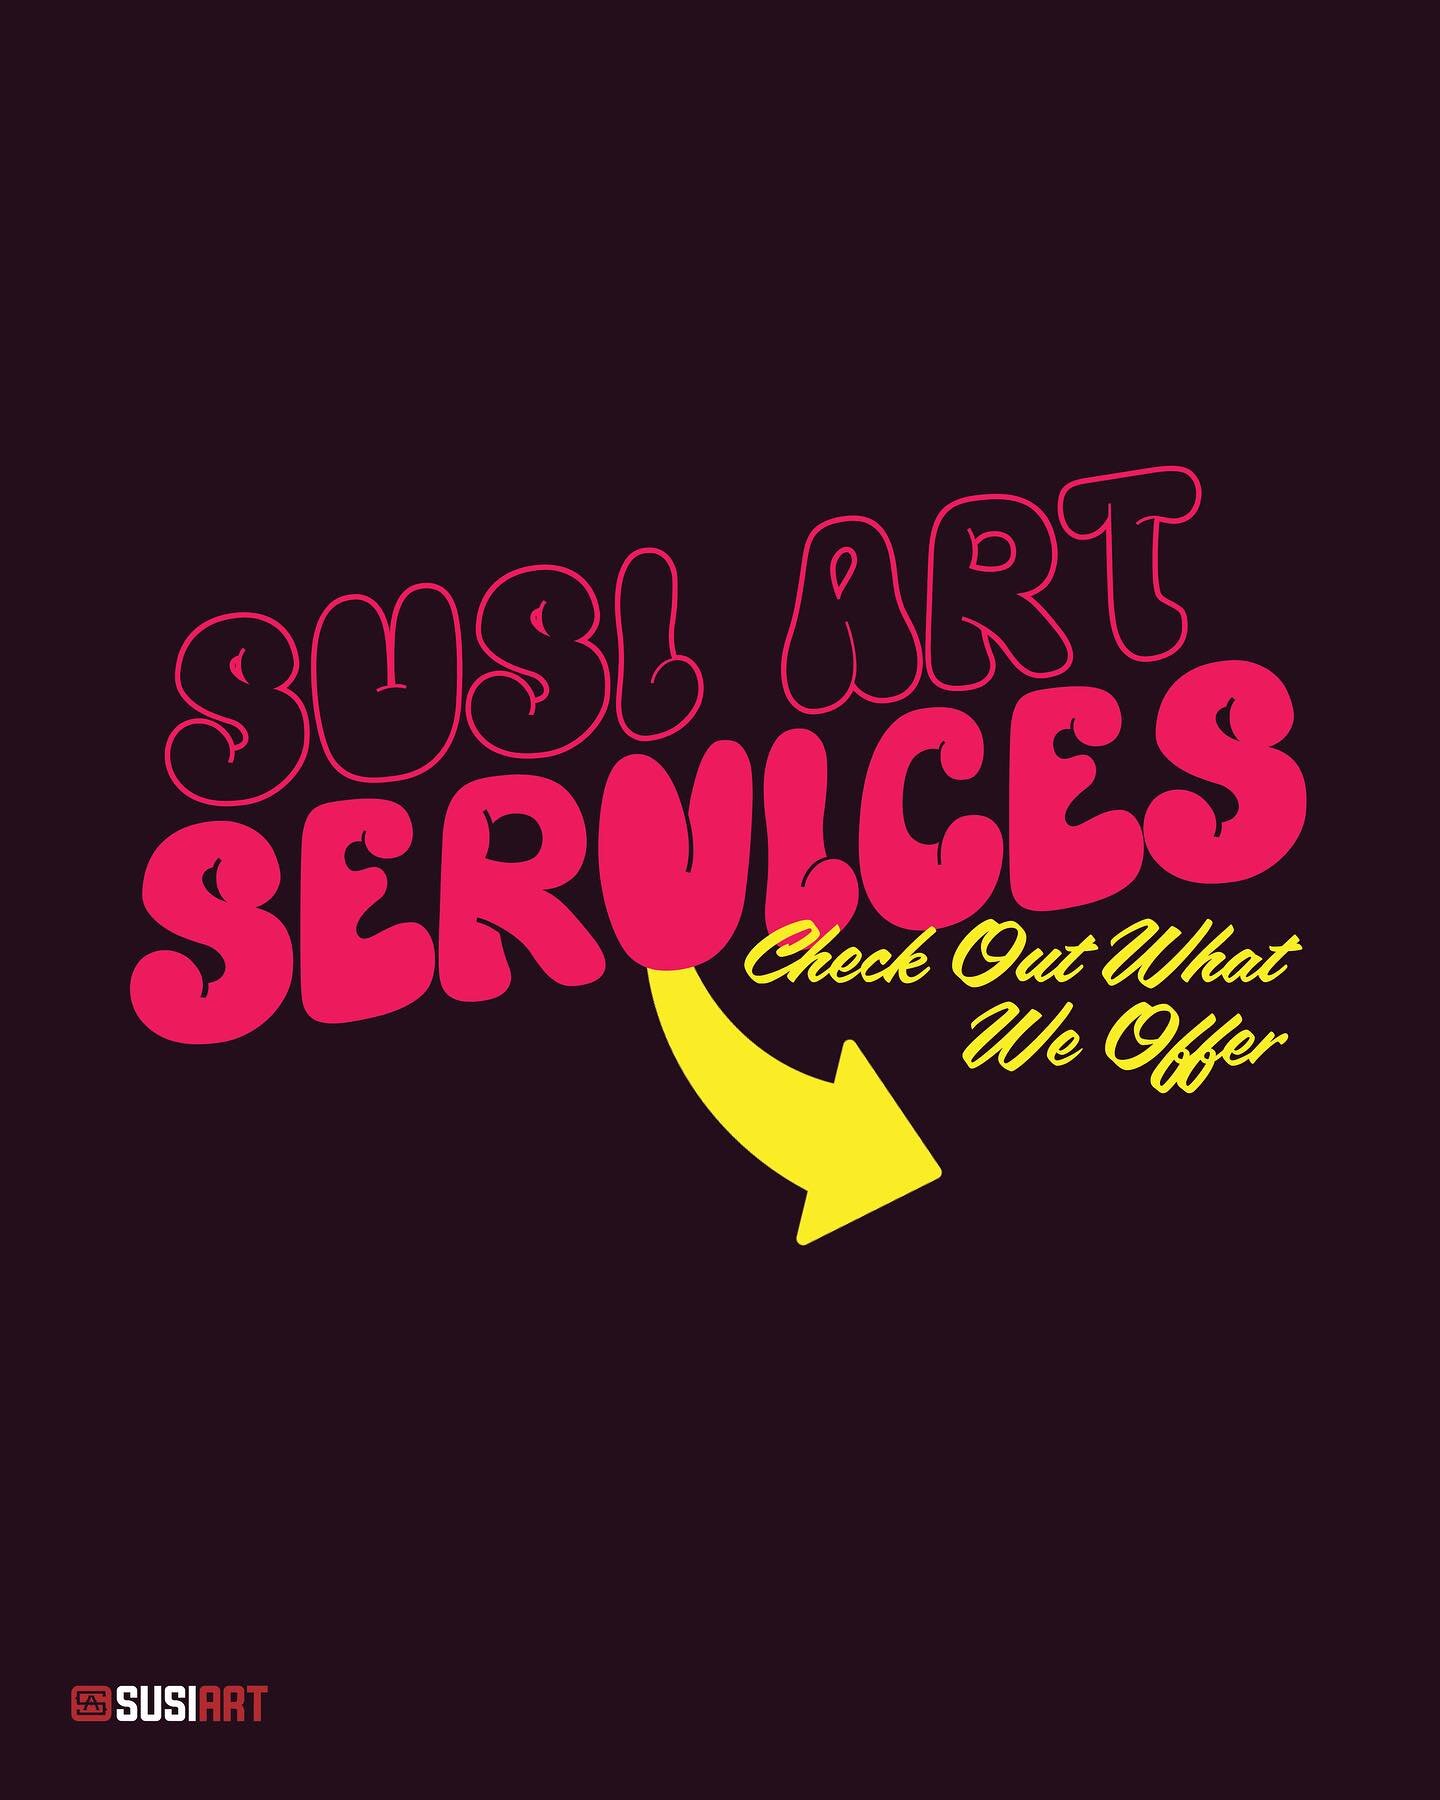 services offered at our shop⚡️ come check us out!
.
.
.
.
#screenprinting #graphicdesign #screenprint #onestrokeinks #vectorart #shoplocal #shopcat #supportsmallbusiness #printerswithpride #customtees #osi